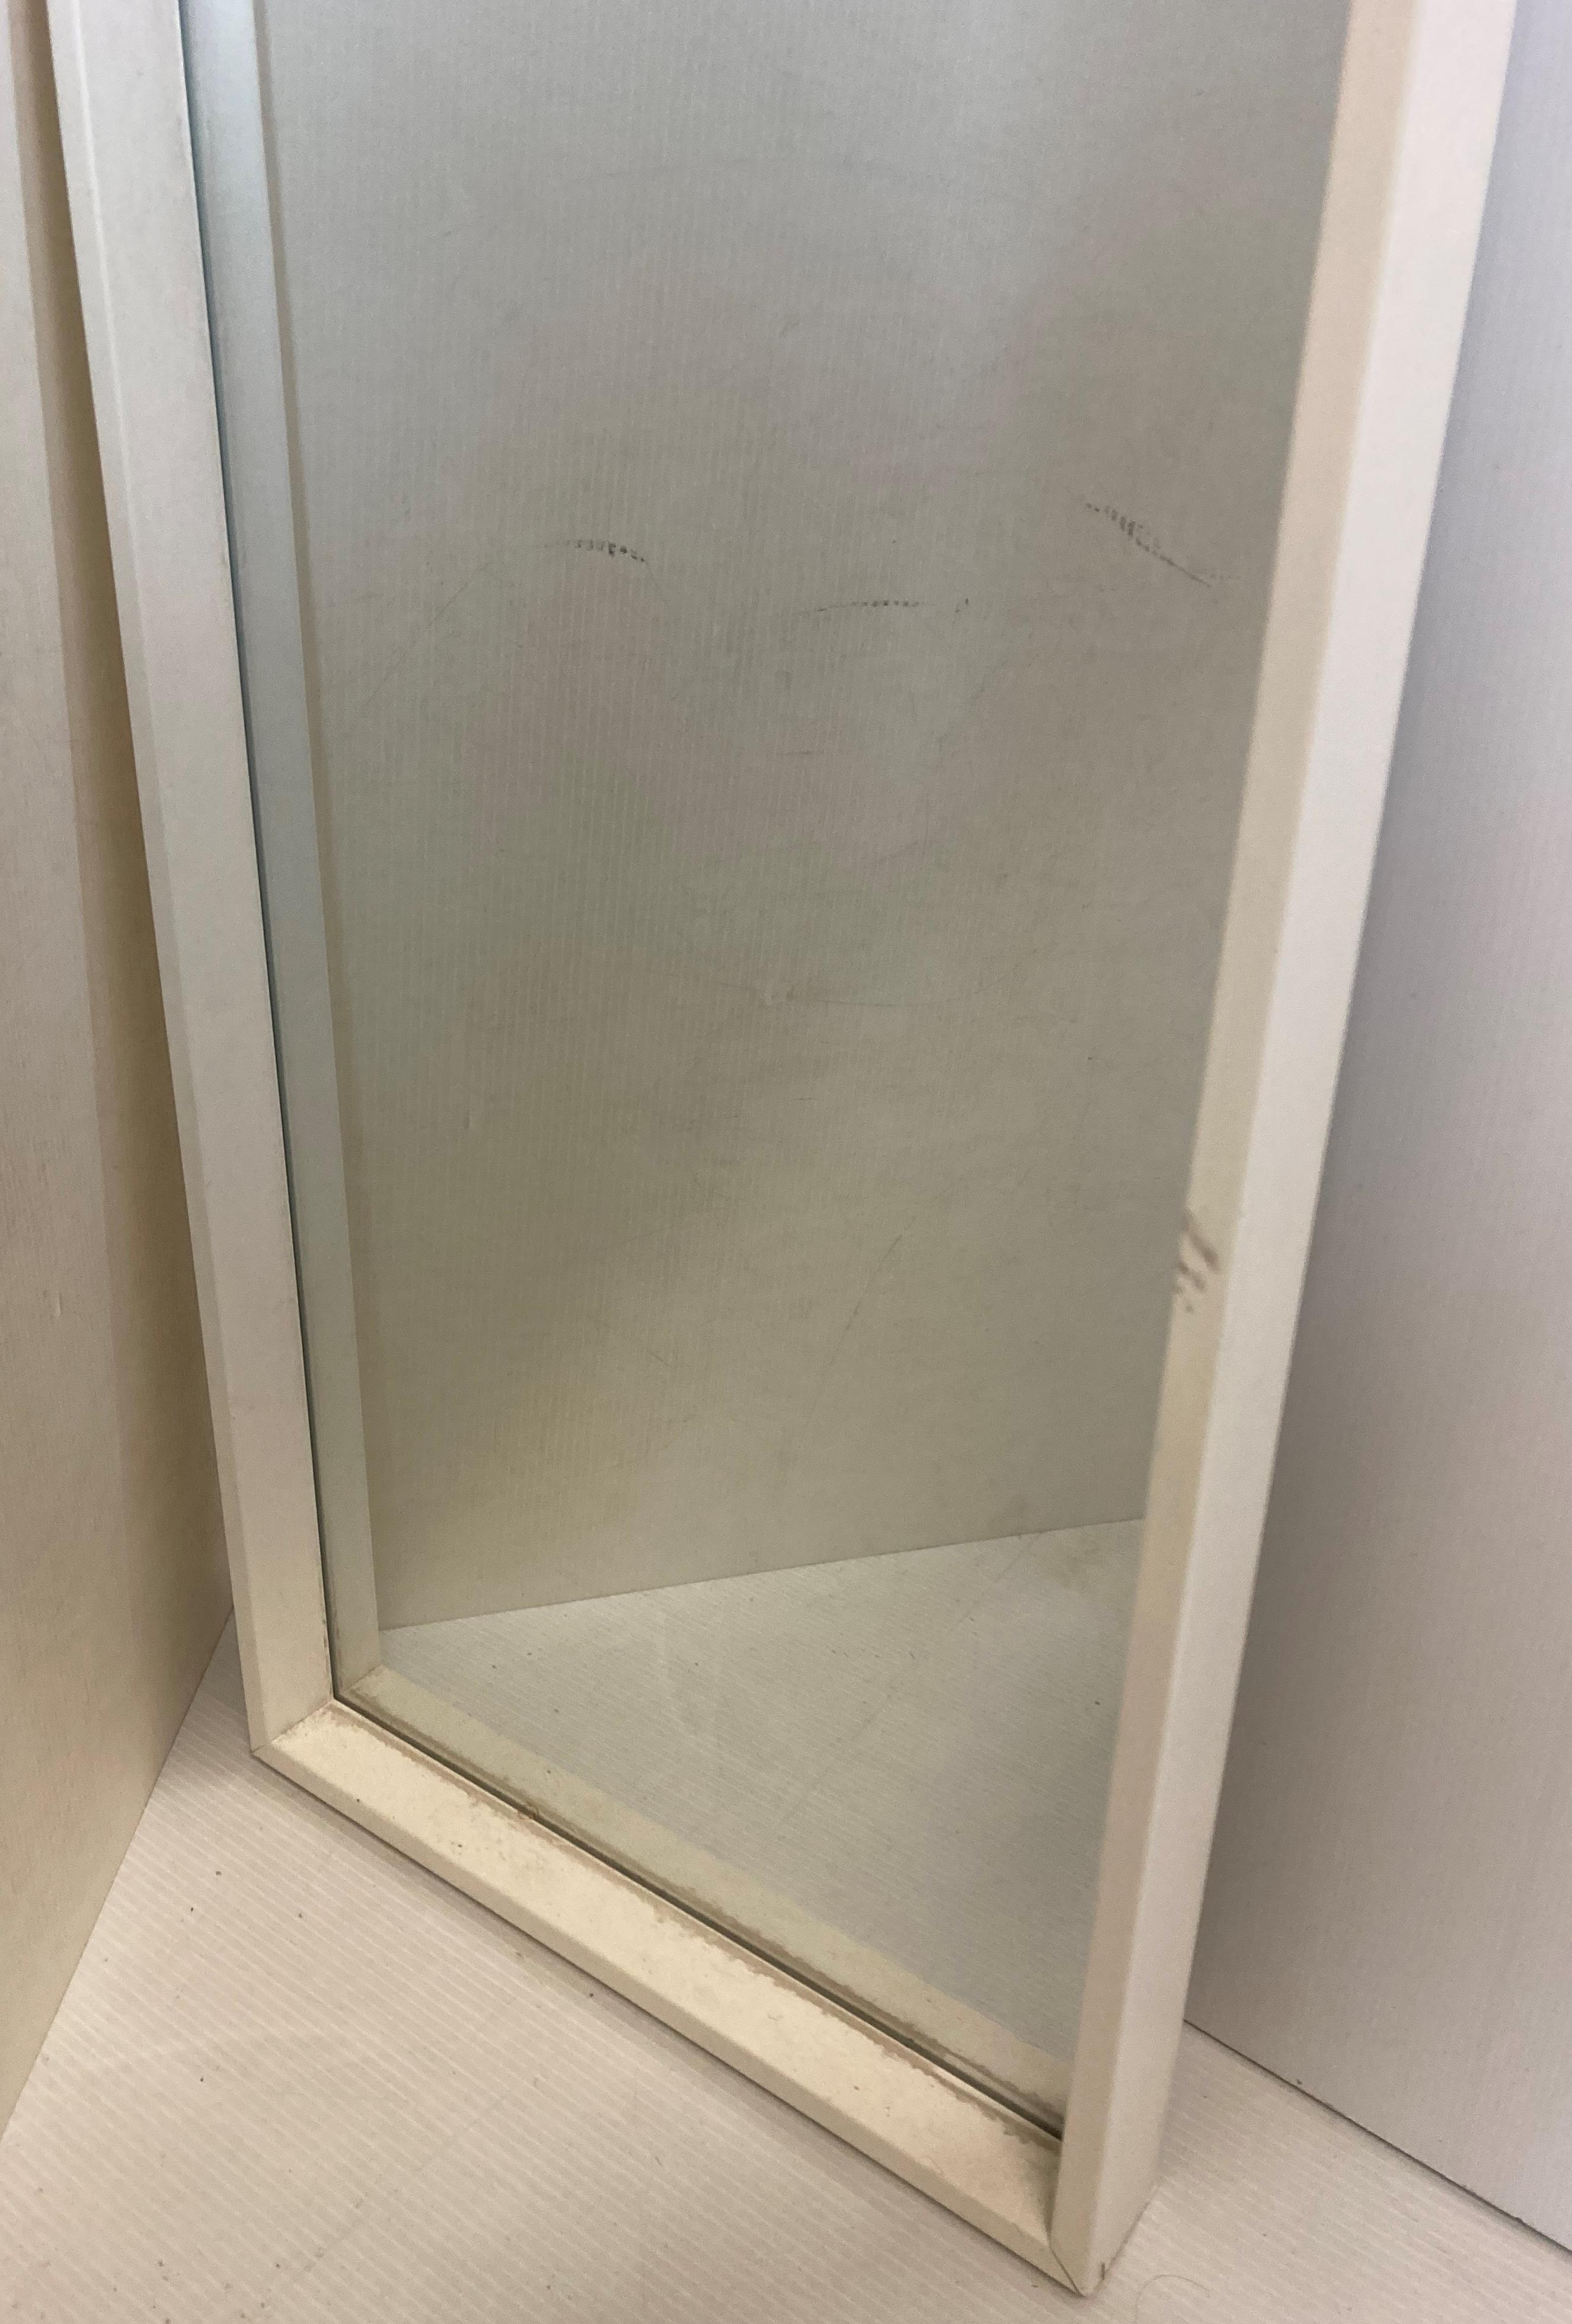 Oblong rectangular wall mirror in white wooden frame, - Image 3 of 3